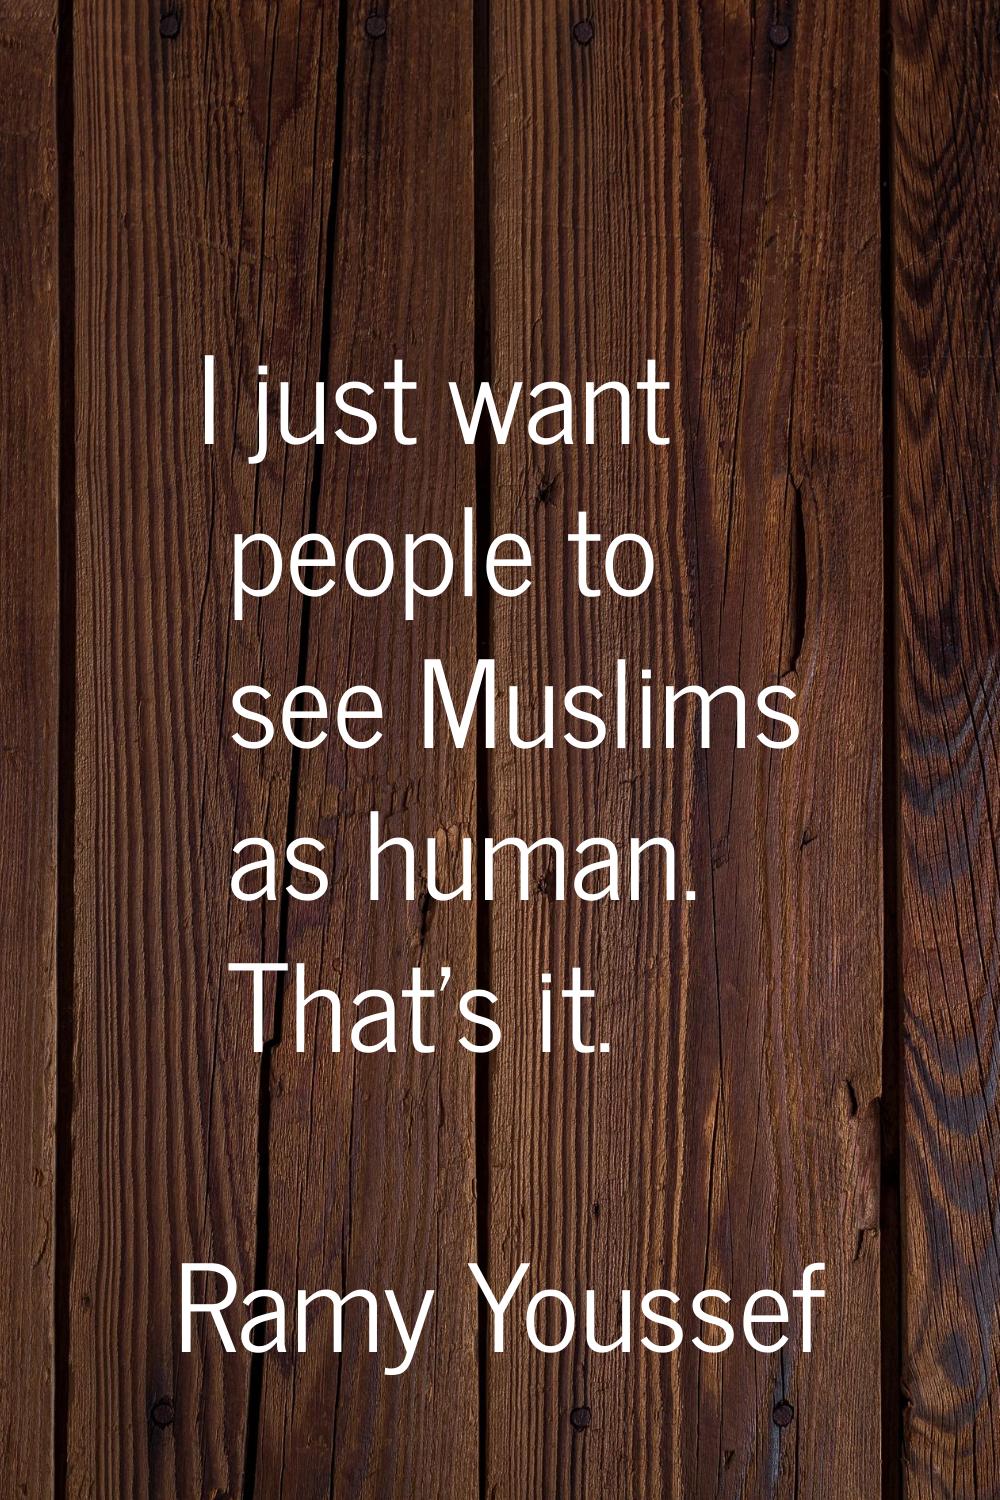 I just want people to see Muslims as human. That's it.